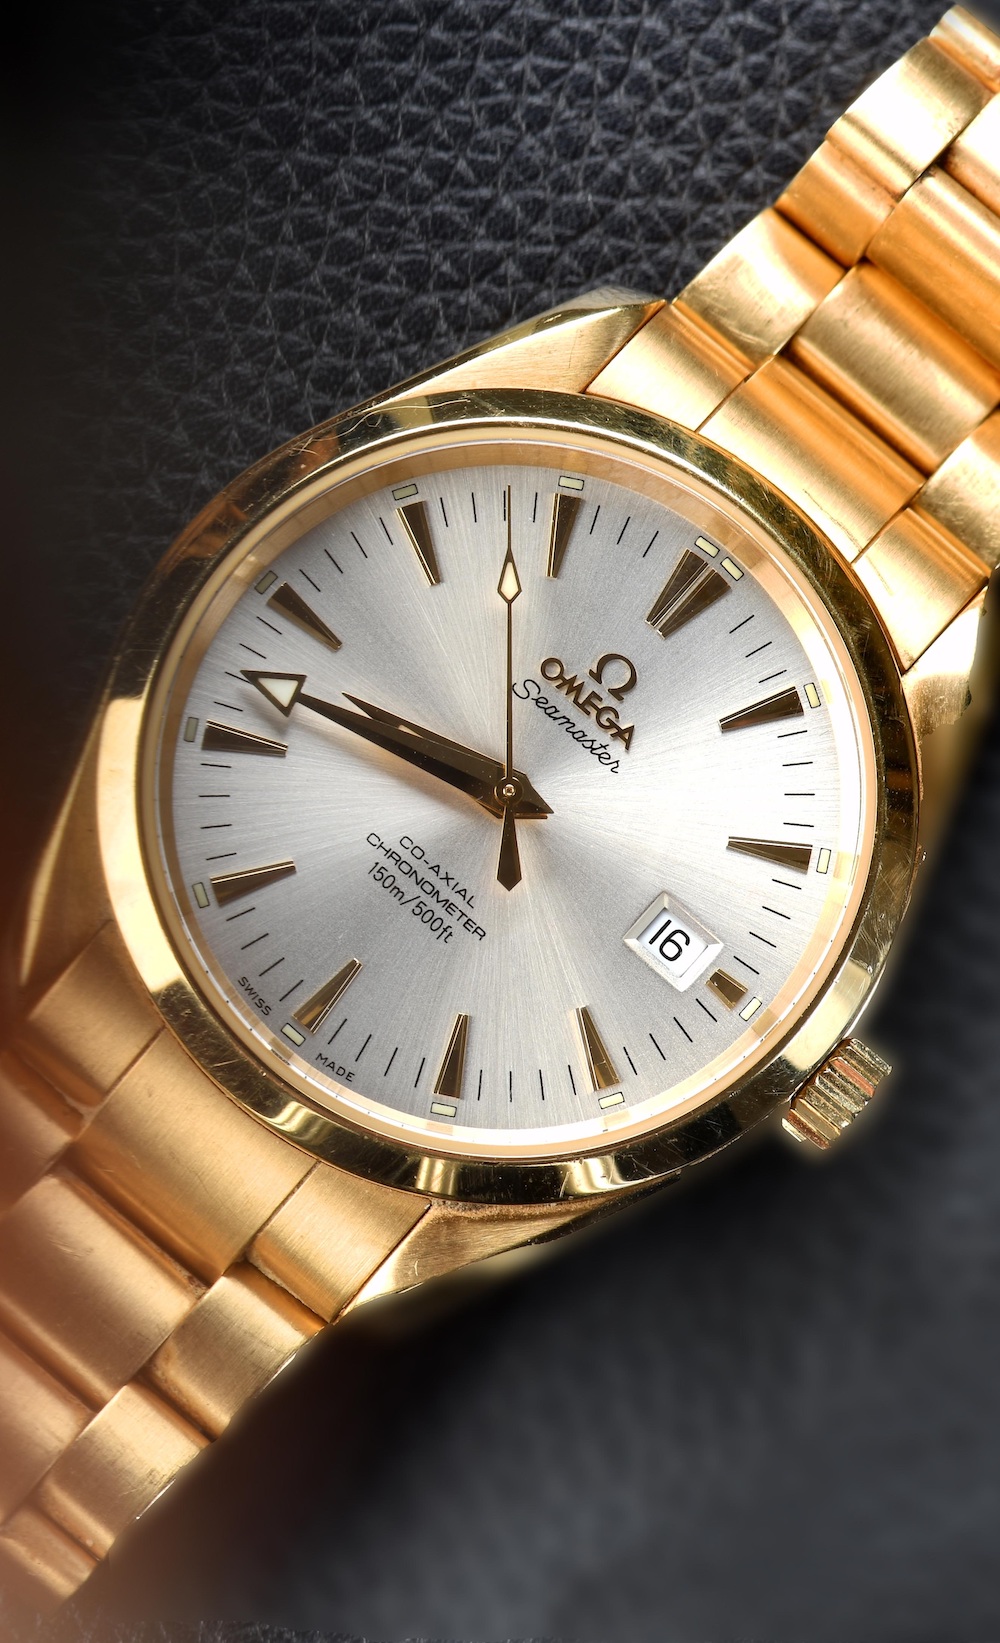 Omega Seamaster Aqua Terra Co Axial Chronometer 18Ct Gold Gentleman's Automatic Diver's Wristwatch. Sold For £7,900